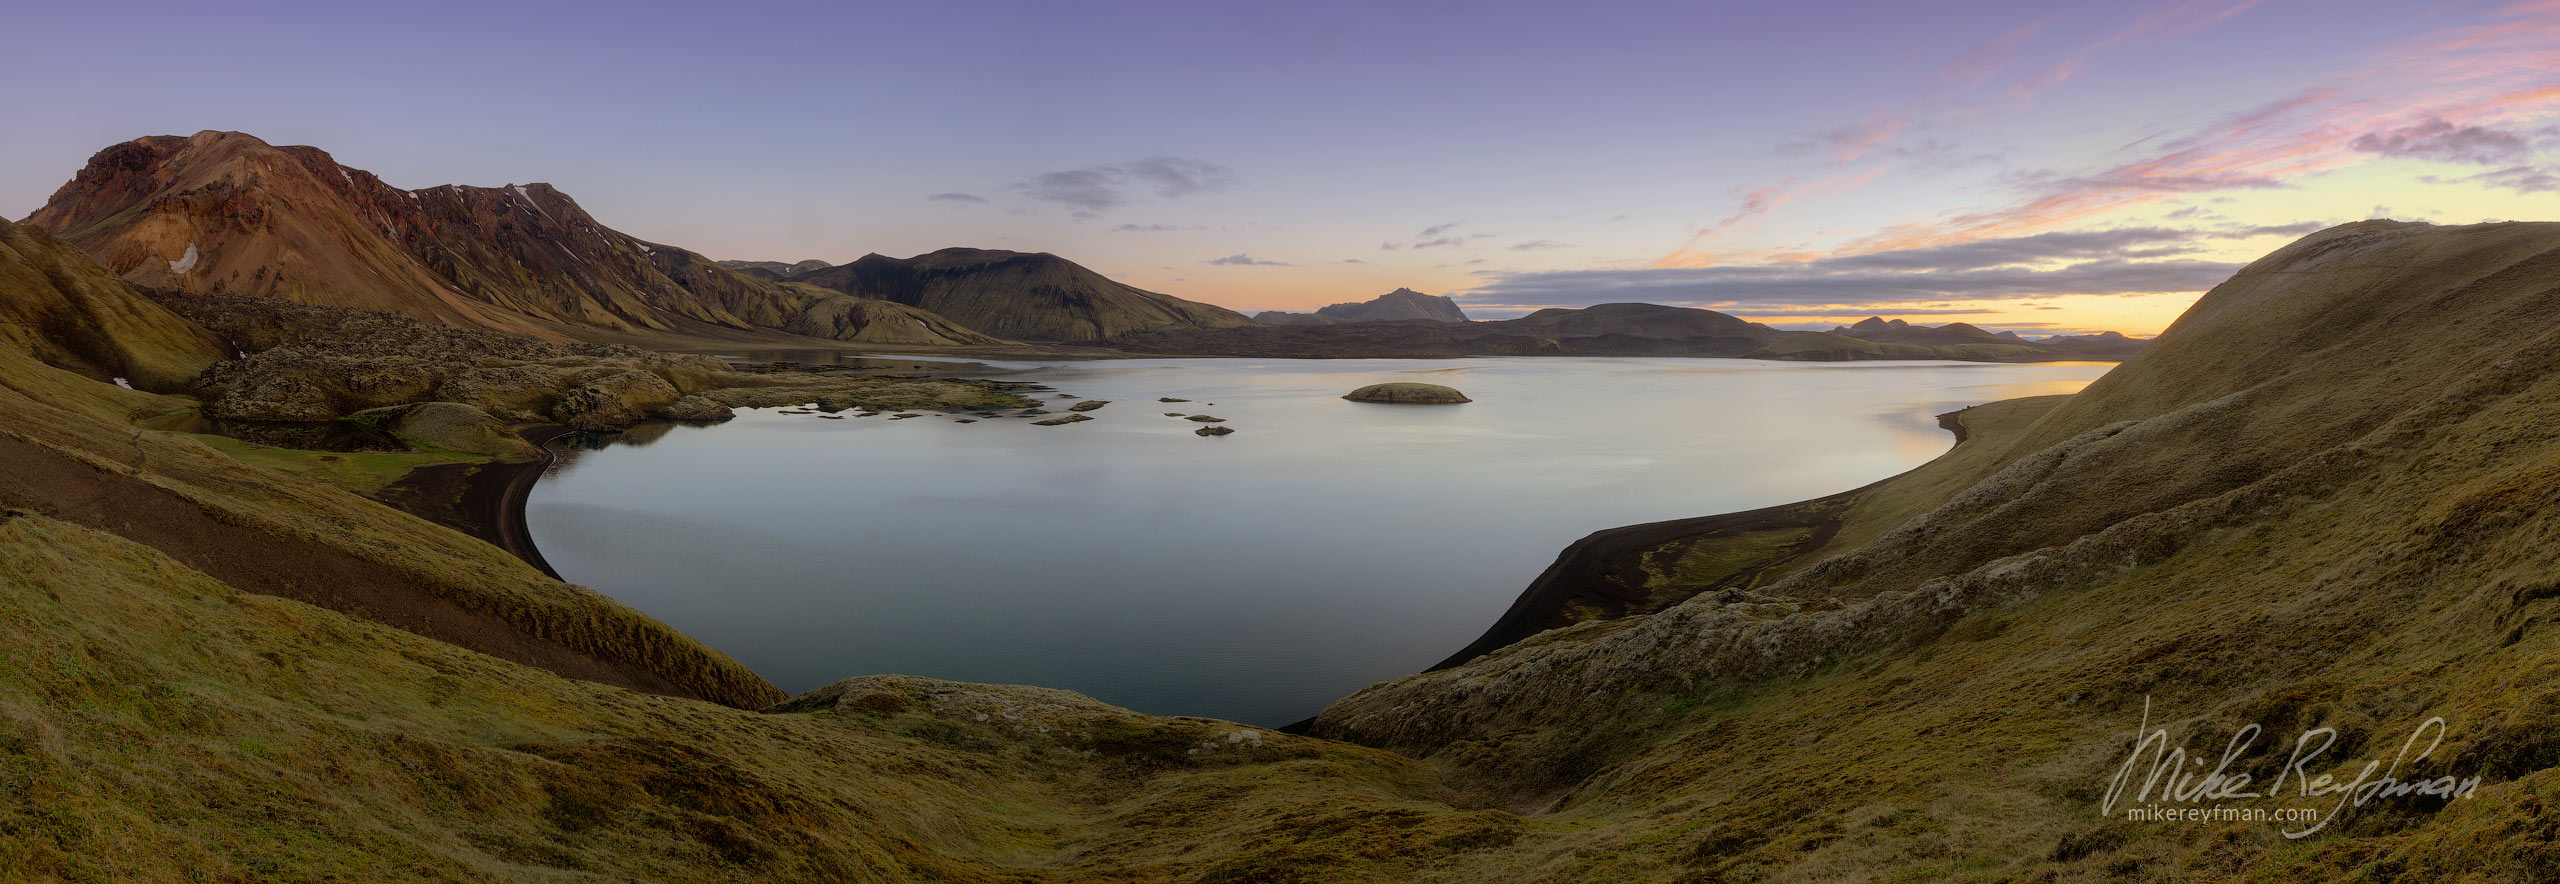 Lake Frostastadavatn and Namshraun lava area near Landmannalaugar. Central Highlands, Iceland. 059-IC-GP _D8B4316_Pano-1x3 - Rhyolite Mountains, Crater Lakes, Geothermal Areas, Lava Fields and Glacial Rivers. Iceland.  - Mike Reyfman Photography